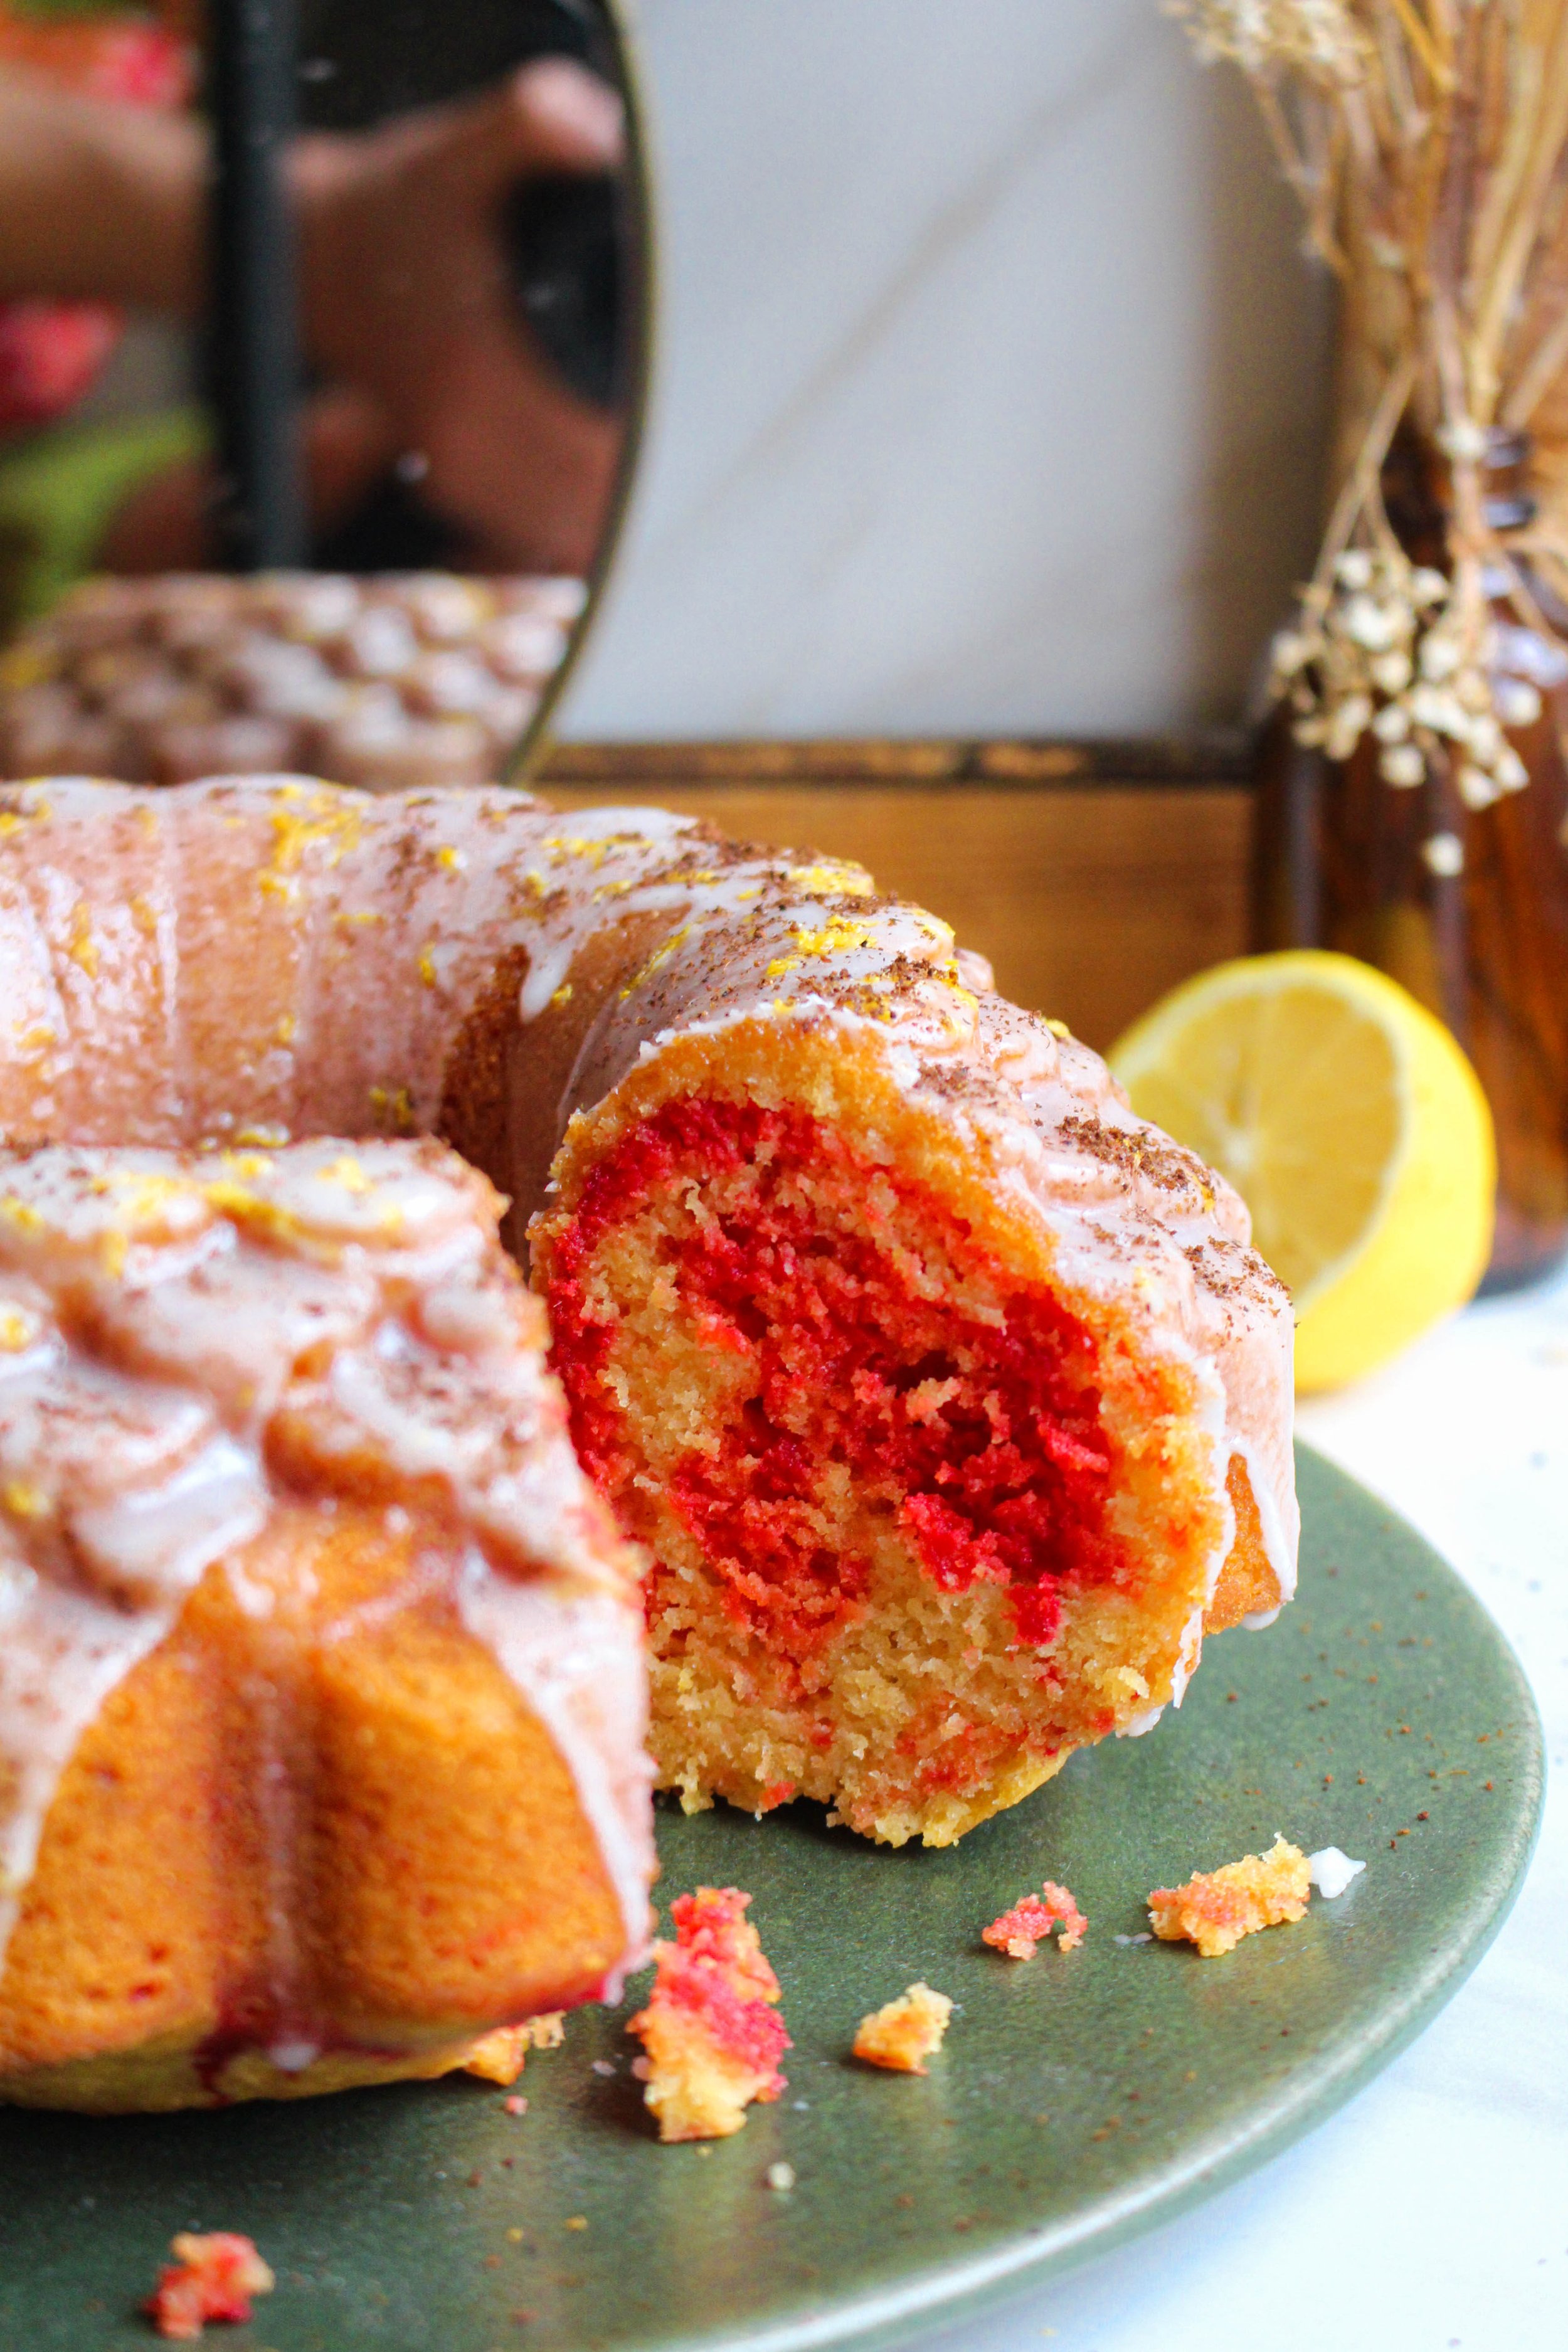 Olive Oil Bundt Cake With Beet Swirl Recipe - NYT Cooking